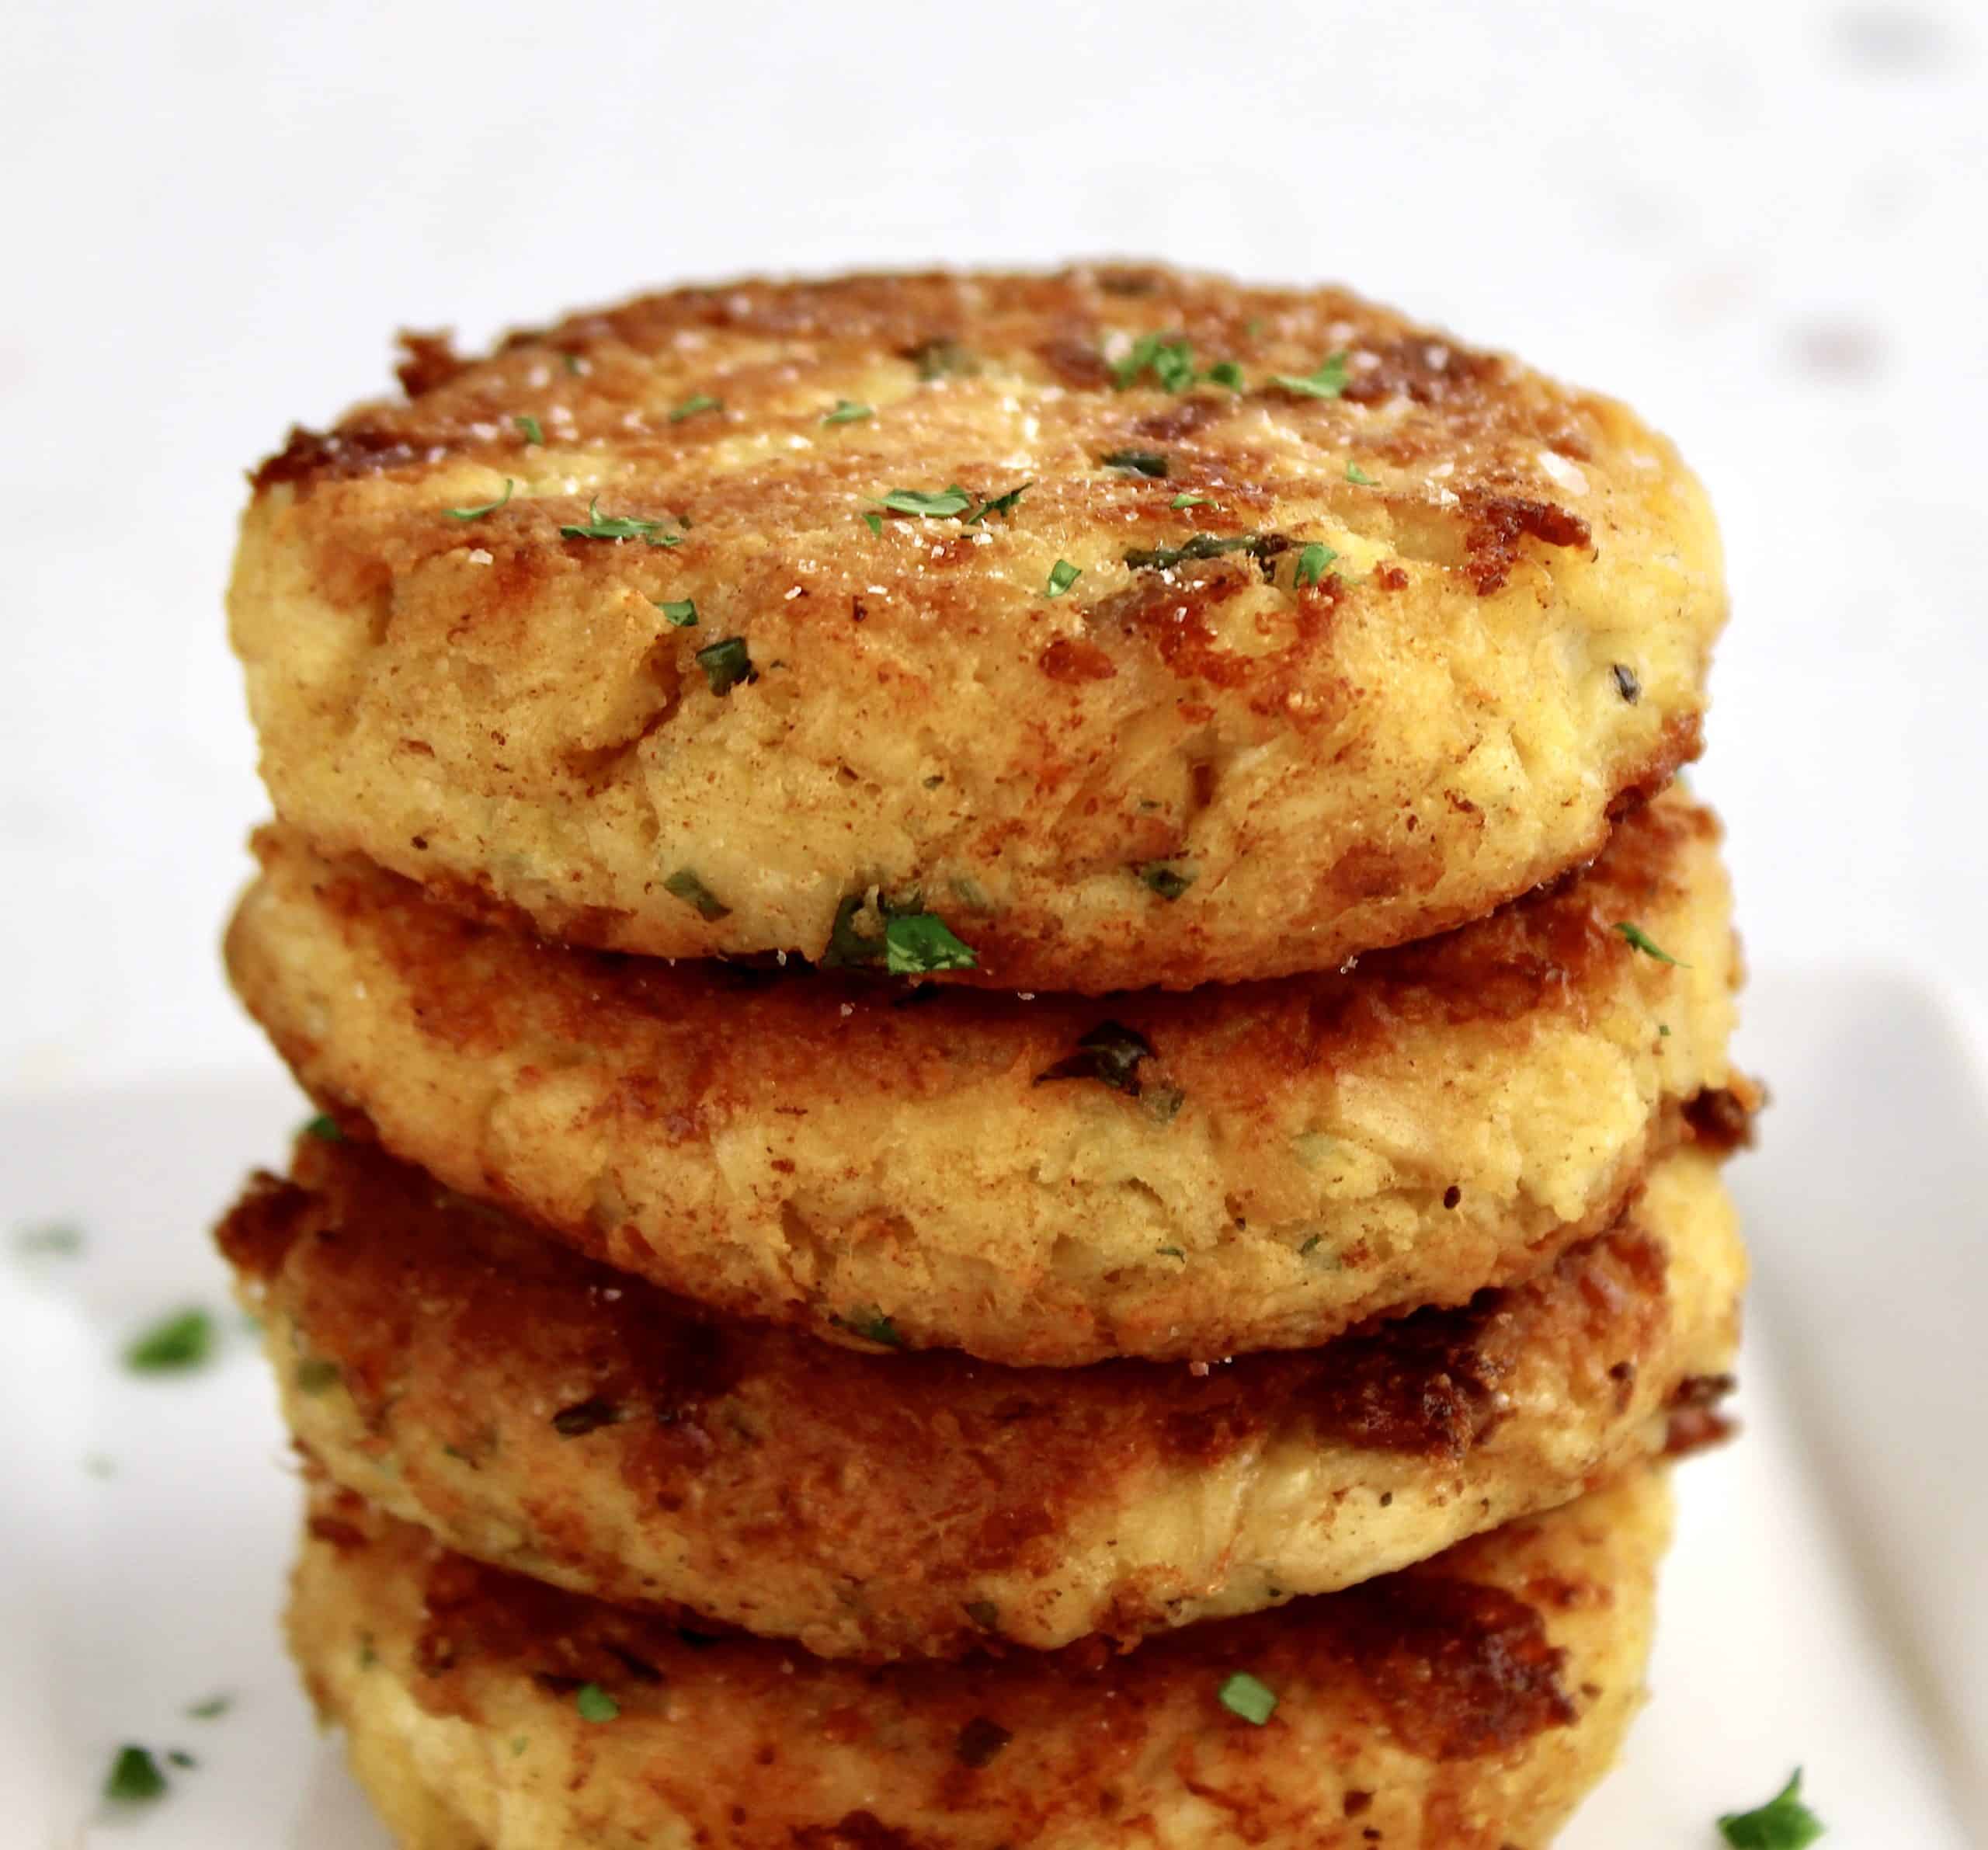 stack of 4 chicken patties on white plate